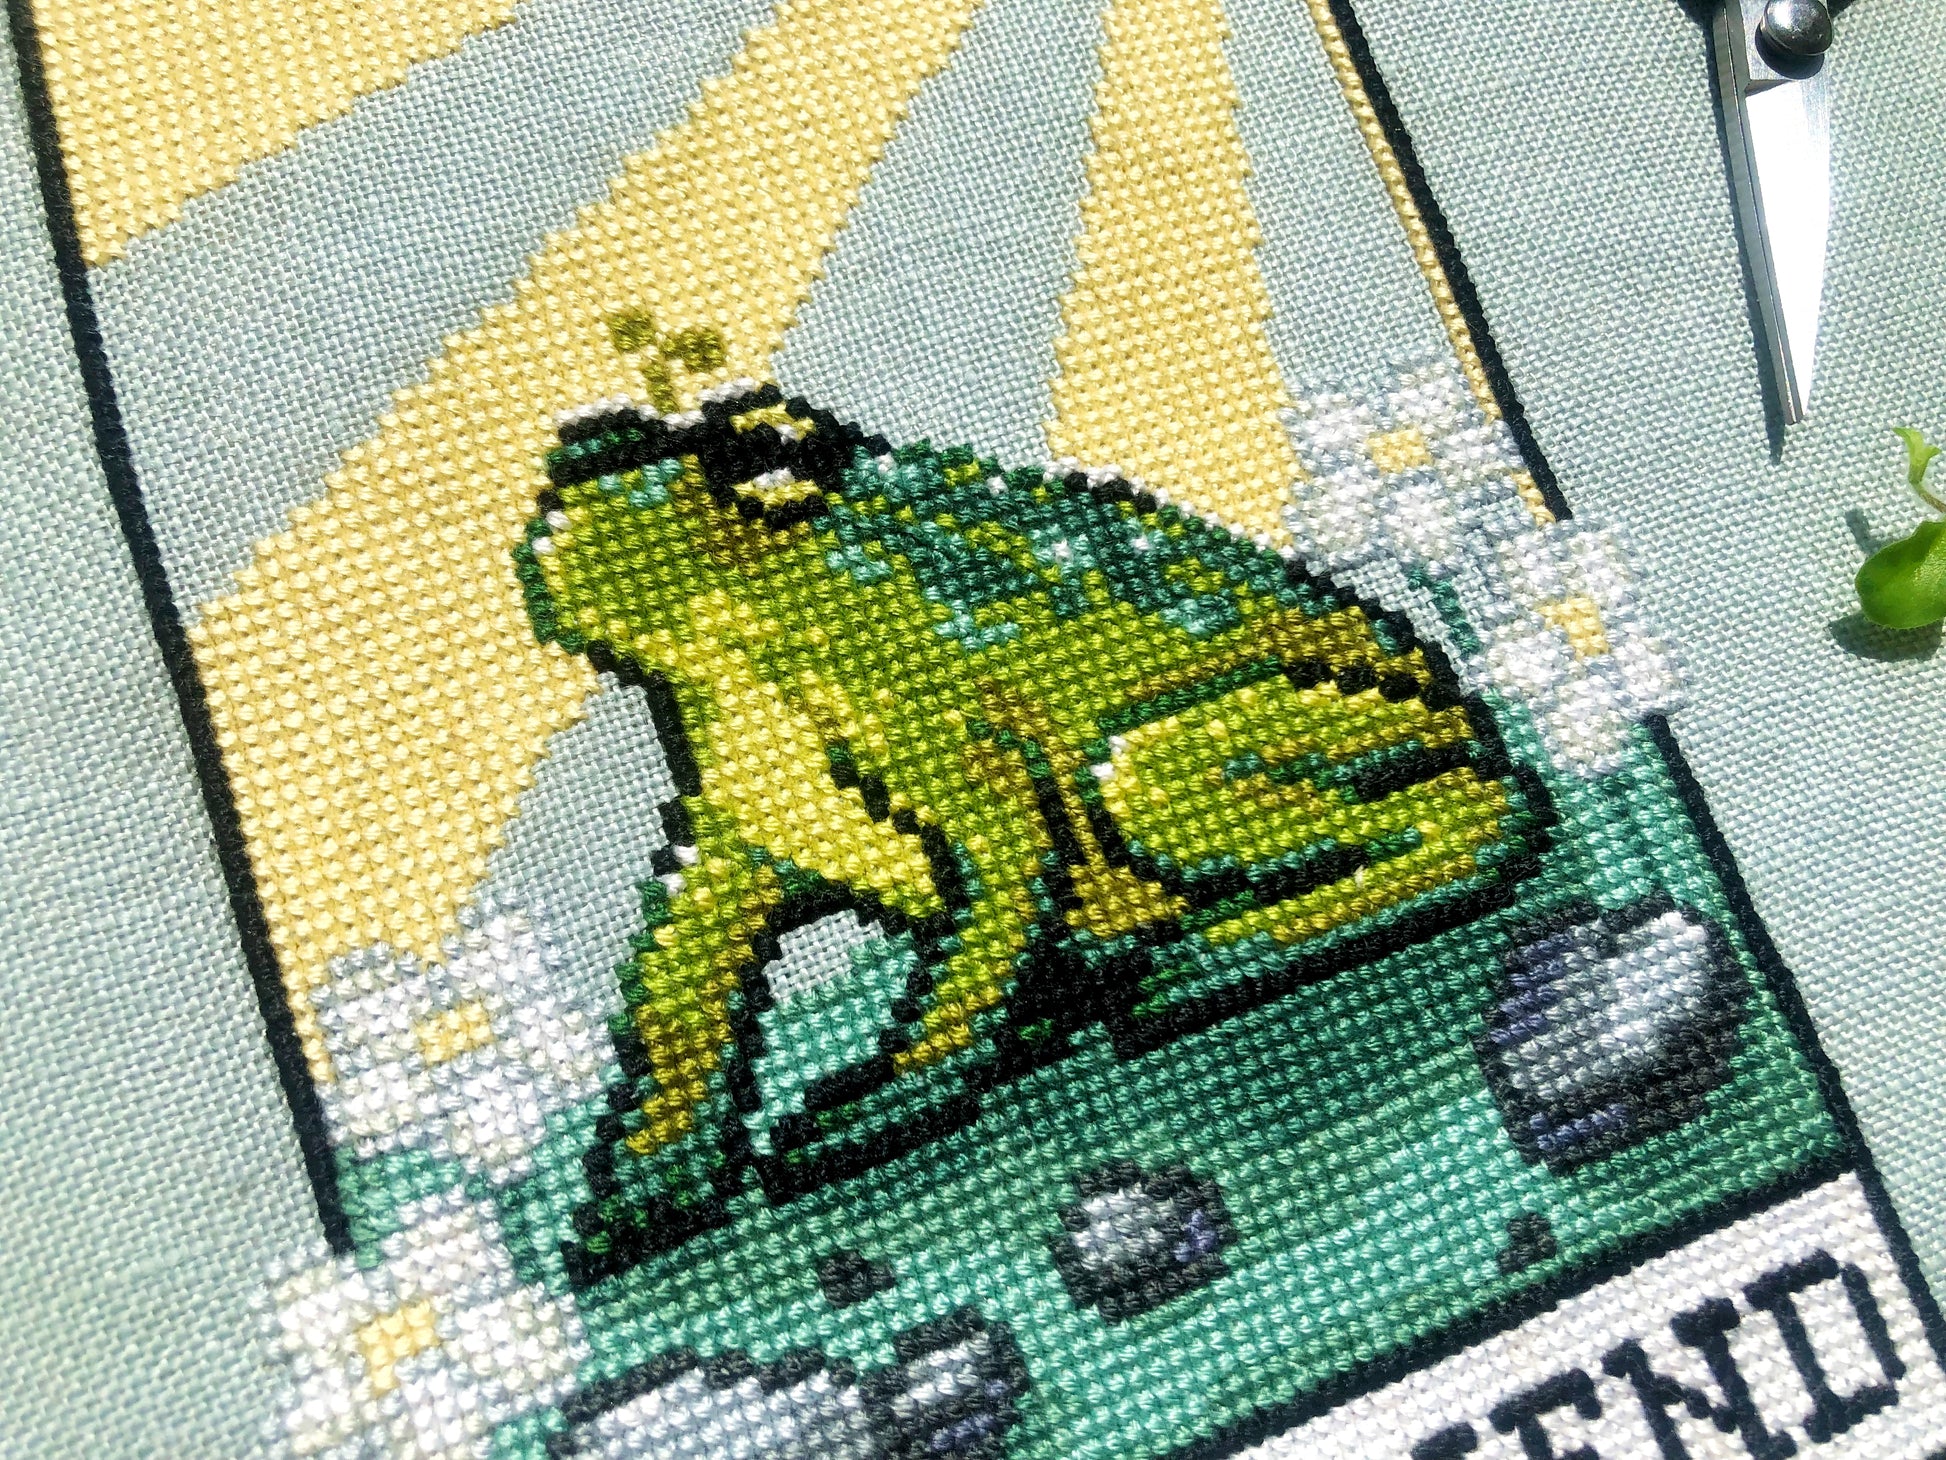 Closeup of The Friend frog tarot cross stitch pattern. Stitched item, surrounded by decorations. Finished piece is of small to medium size. Colors are yellow, green, blue, grey and black. Frog is cute and small. The Friend is written underneath.